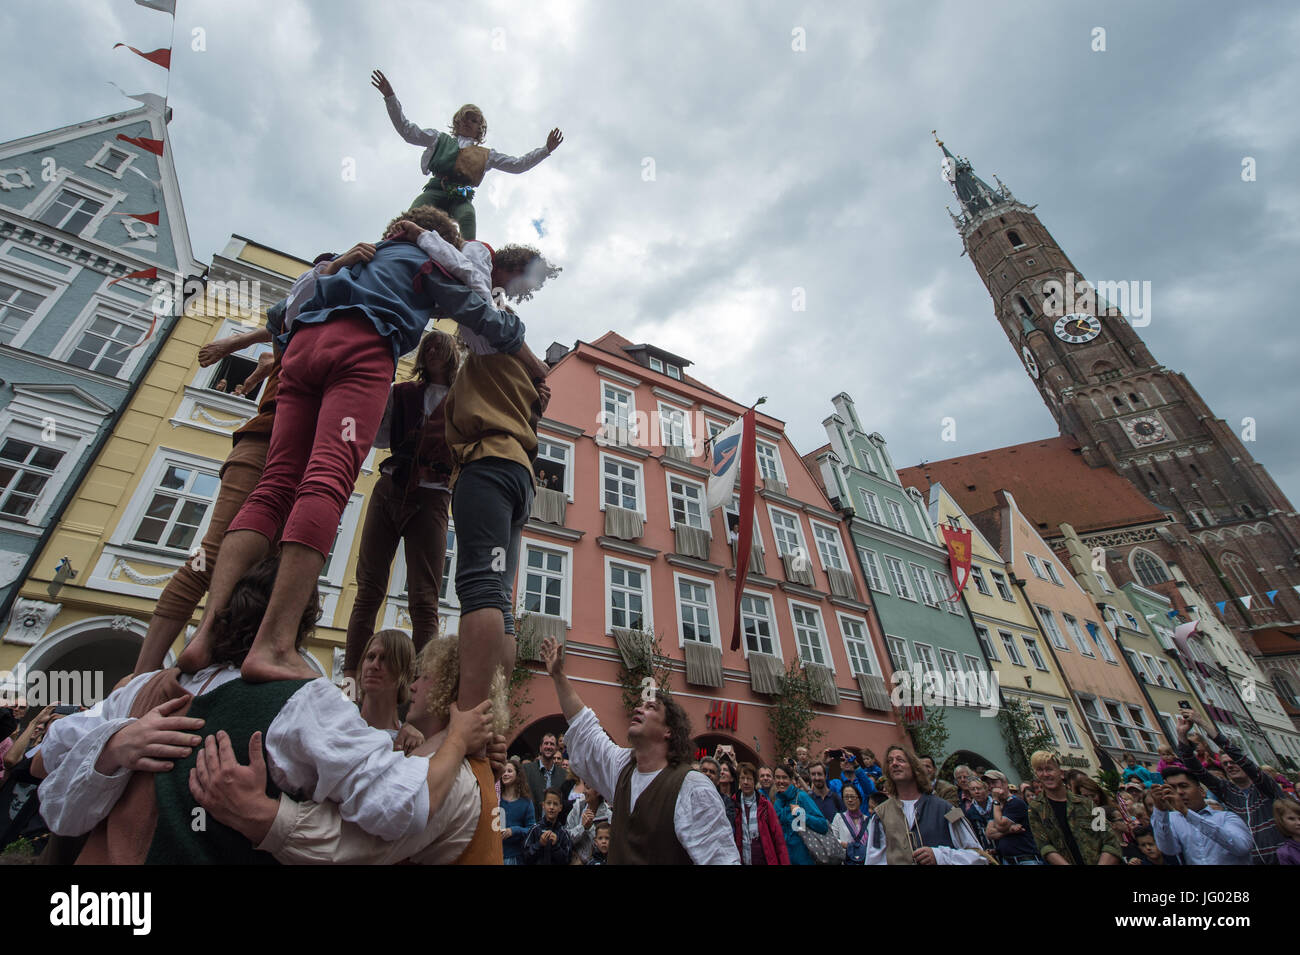 Landshut, Germany. 2nd July, 2017. People in historical costumes perform shortly before the parade of the Landshut Wedding (German: 'Landshuter Hochzeit') in the old town of Landshut, Germany, 2 July 2017. The citizens of the Lower Bavarian regional capital reenact the wedding ceremony of the the son of the Duke of Bavaria, George, and the Polish King's daughter Hedwig in 1475. Photo: Armin Weigel/dpa/Alamy Live News Stock Photo